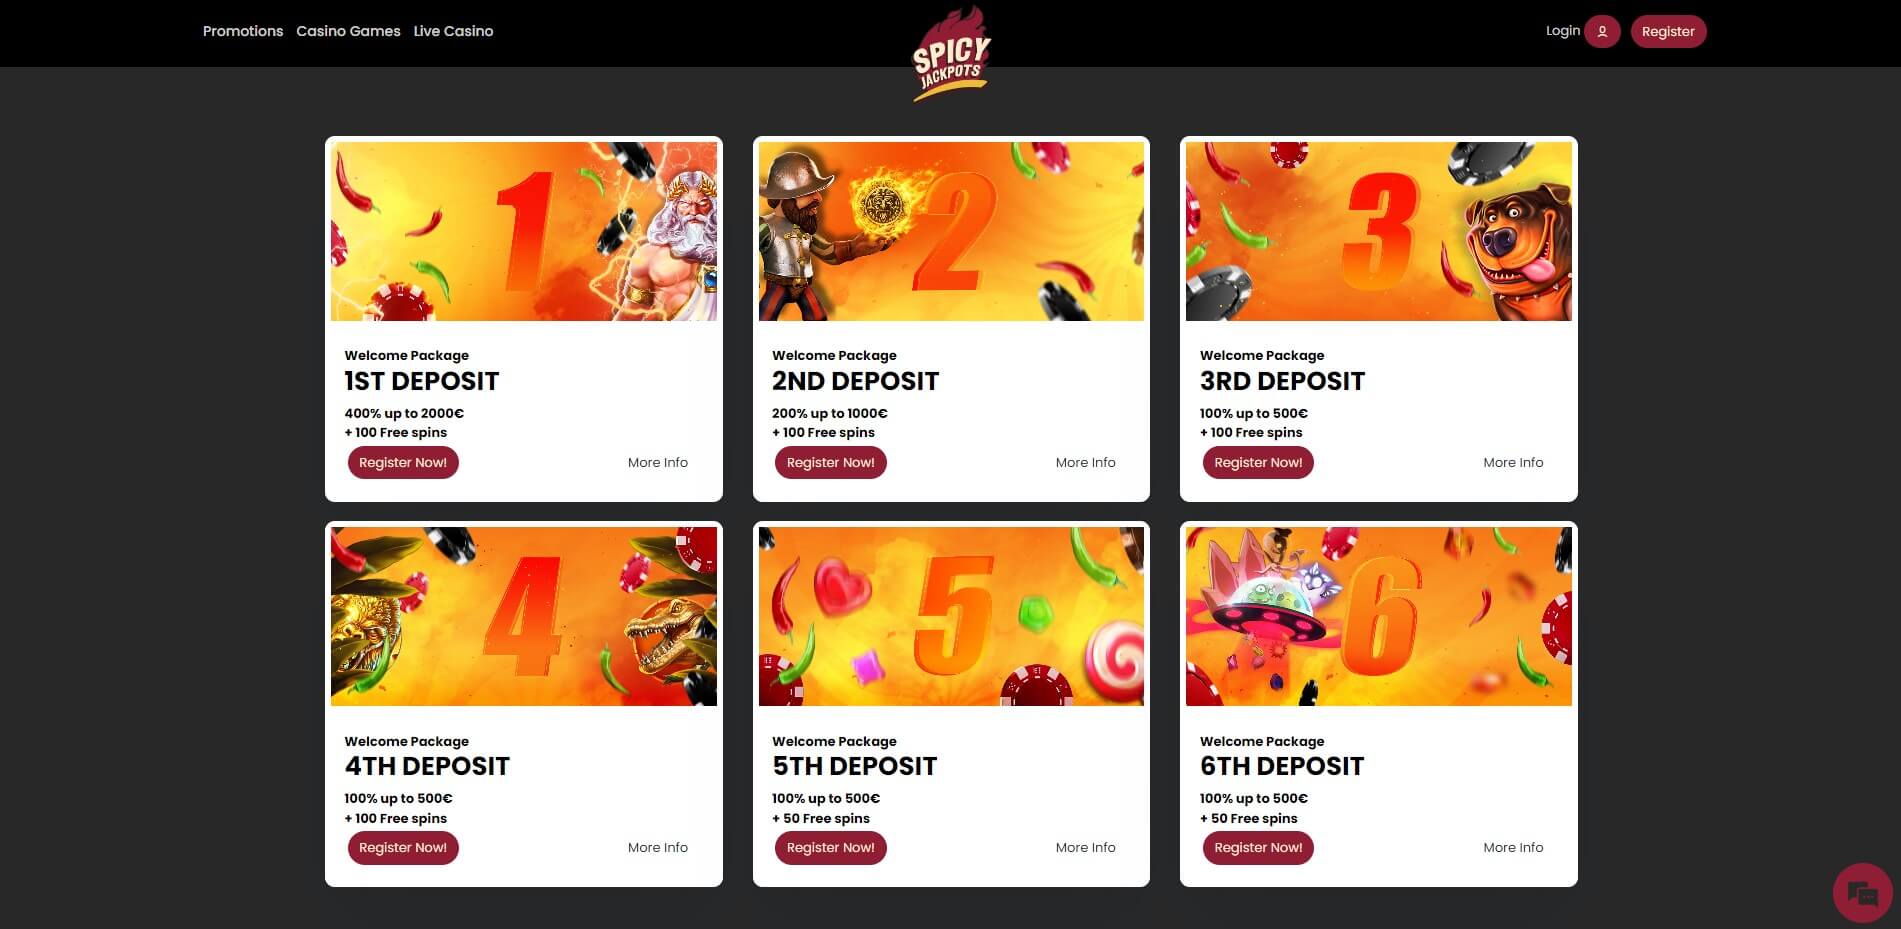 Spicy Jackpots Casino Promotions